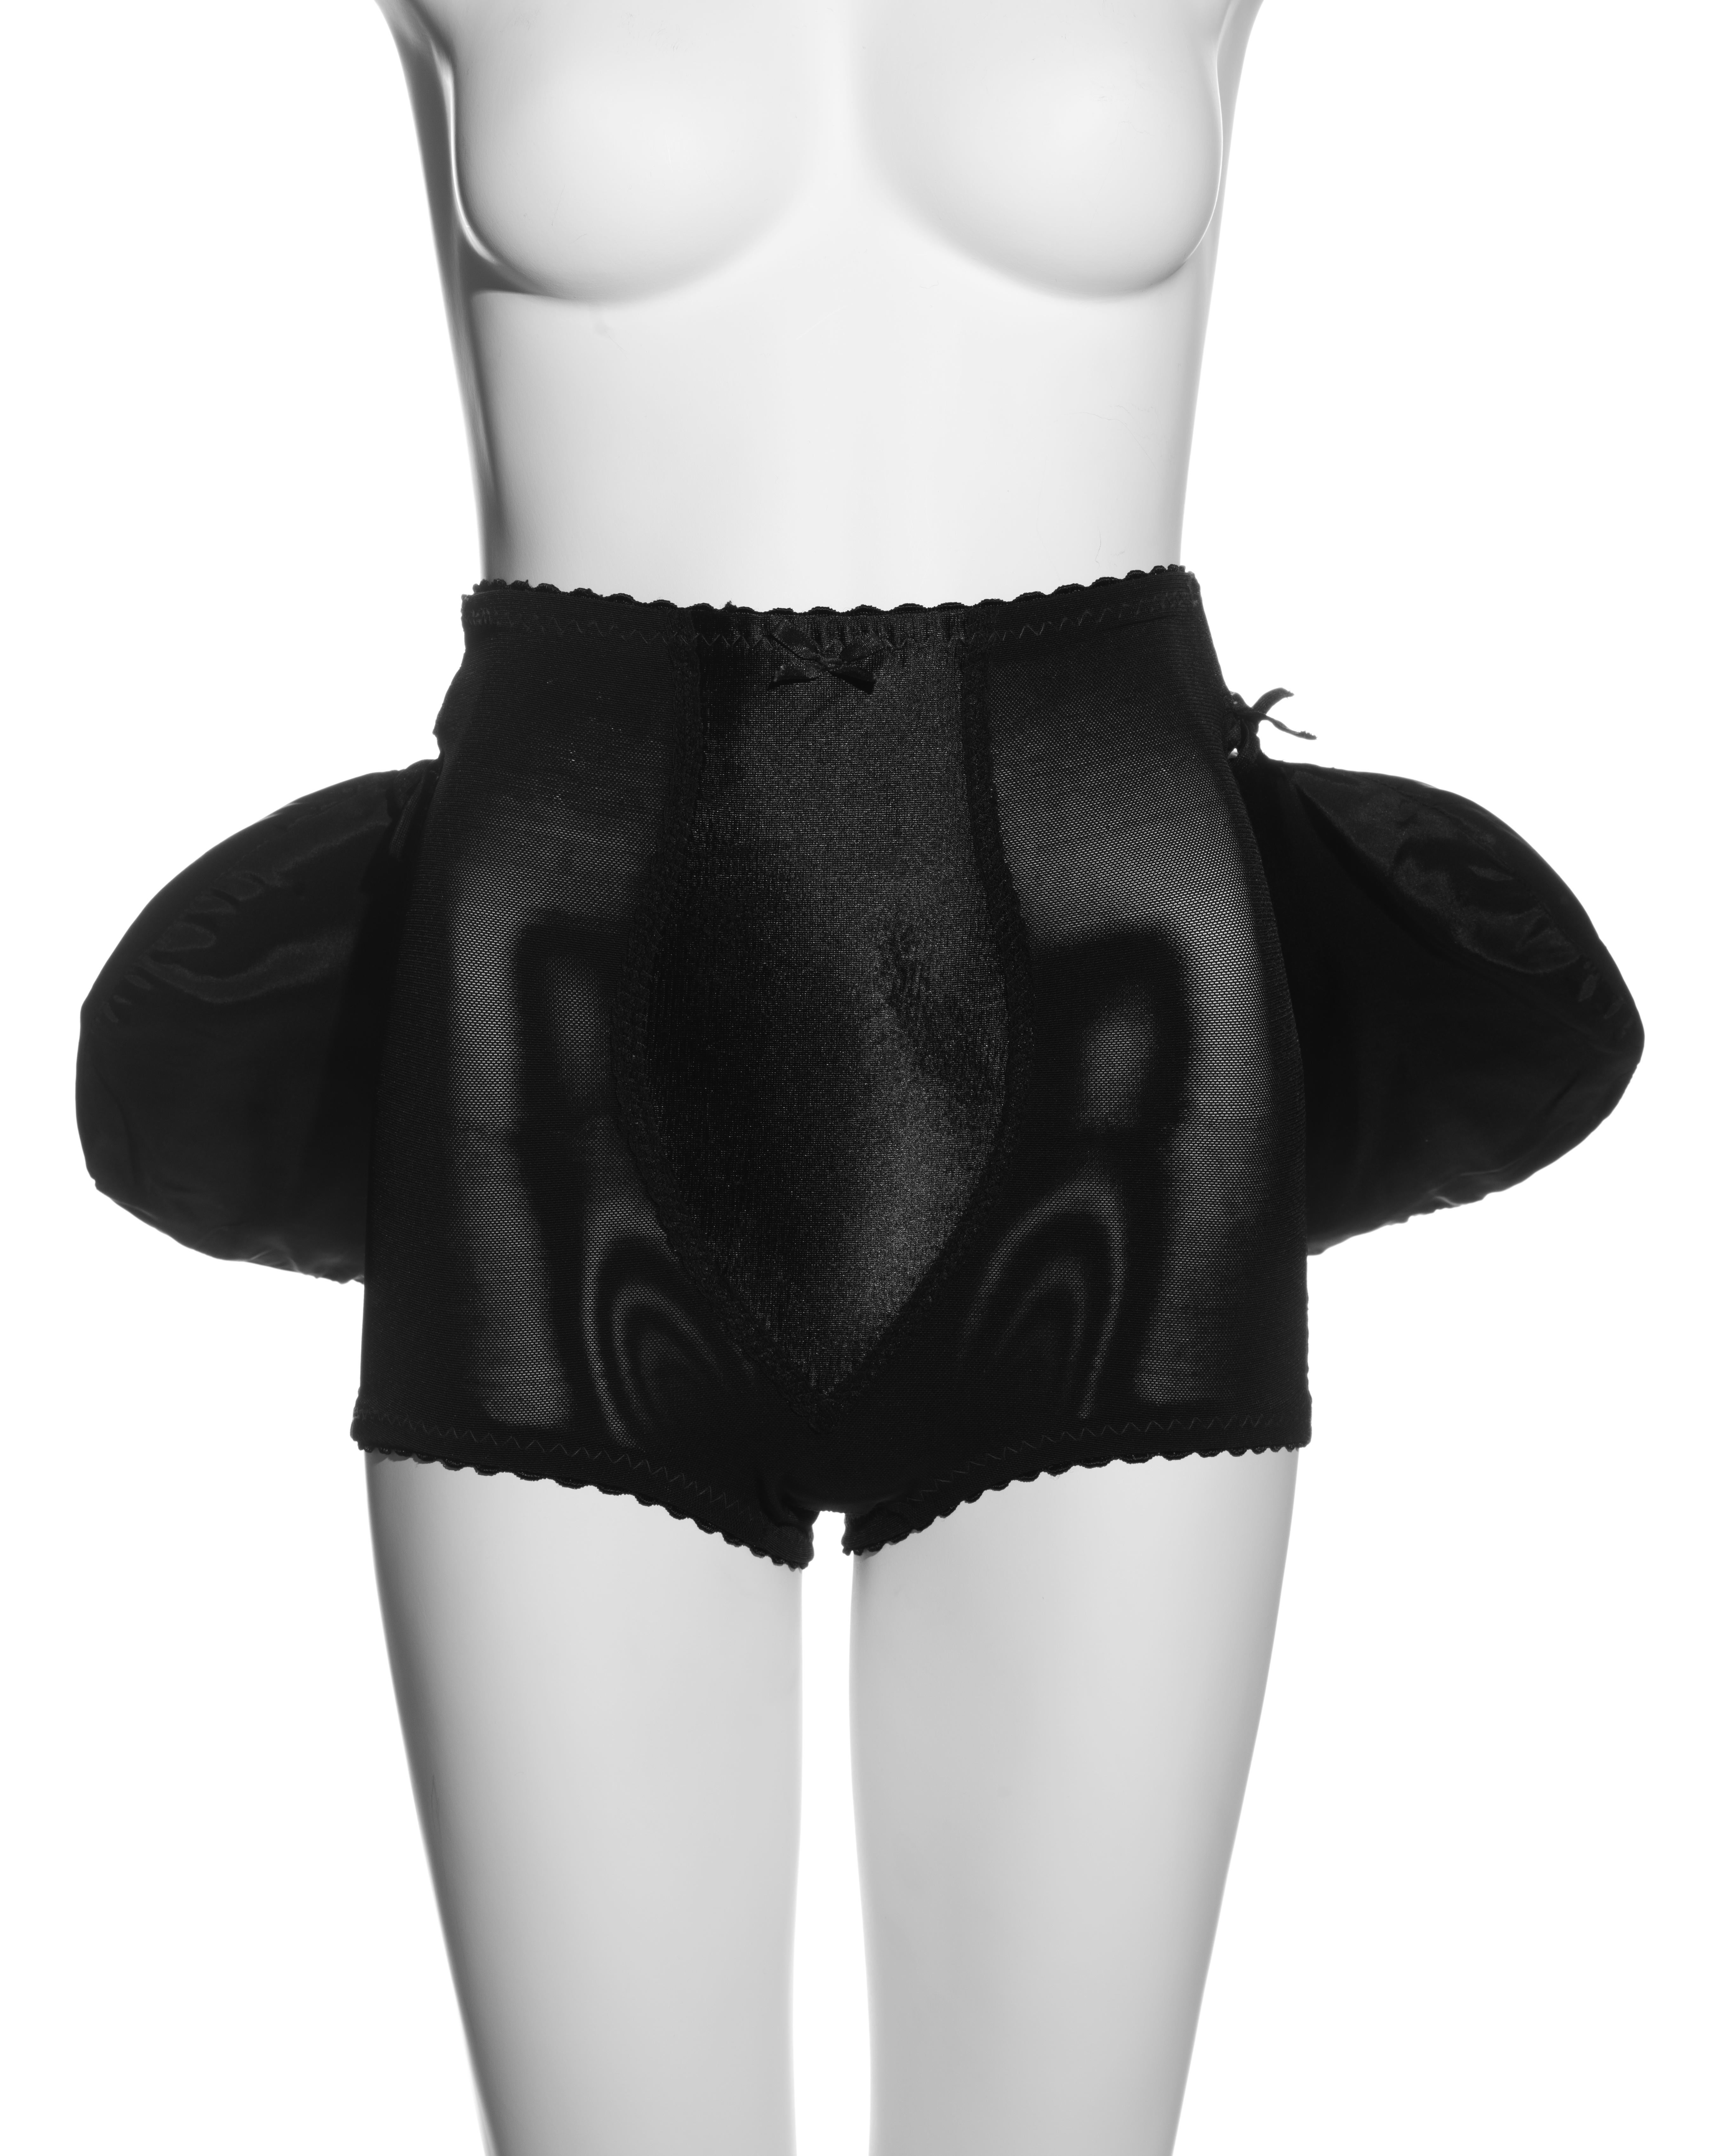 ▪ Vivienne Westwood black panties and bustle set
▪ Power mesh and satin 
▪ Bustle attached with ribbon ties 
▪ Scalloped trim 
▪ Labelled 'One Size' 
▪ Spring-Summer 1995